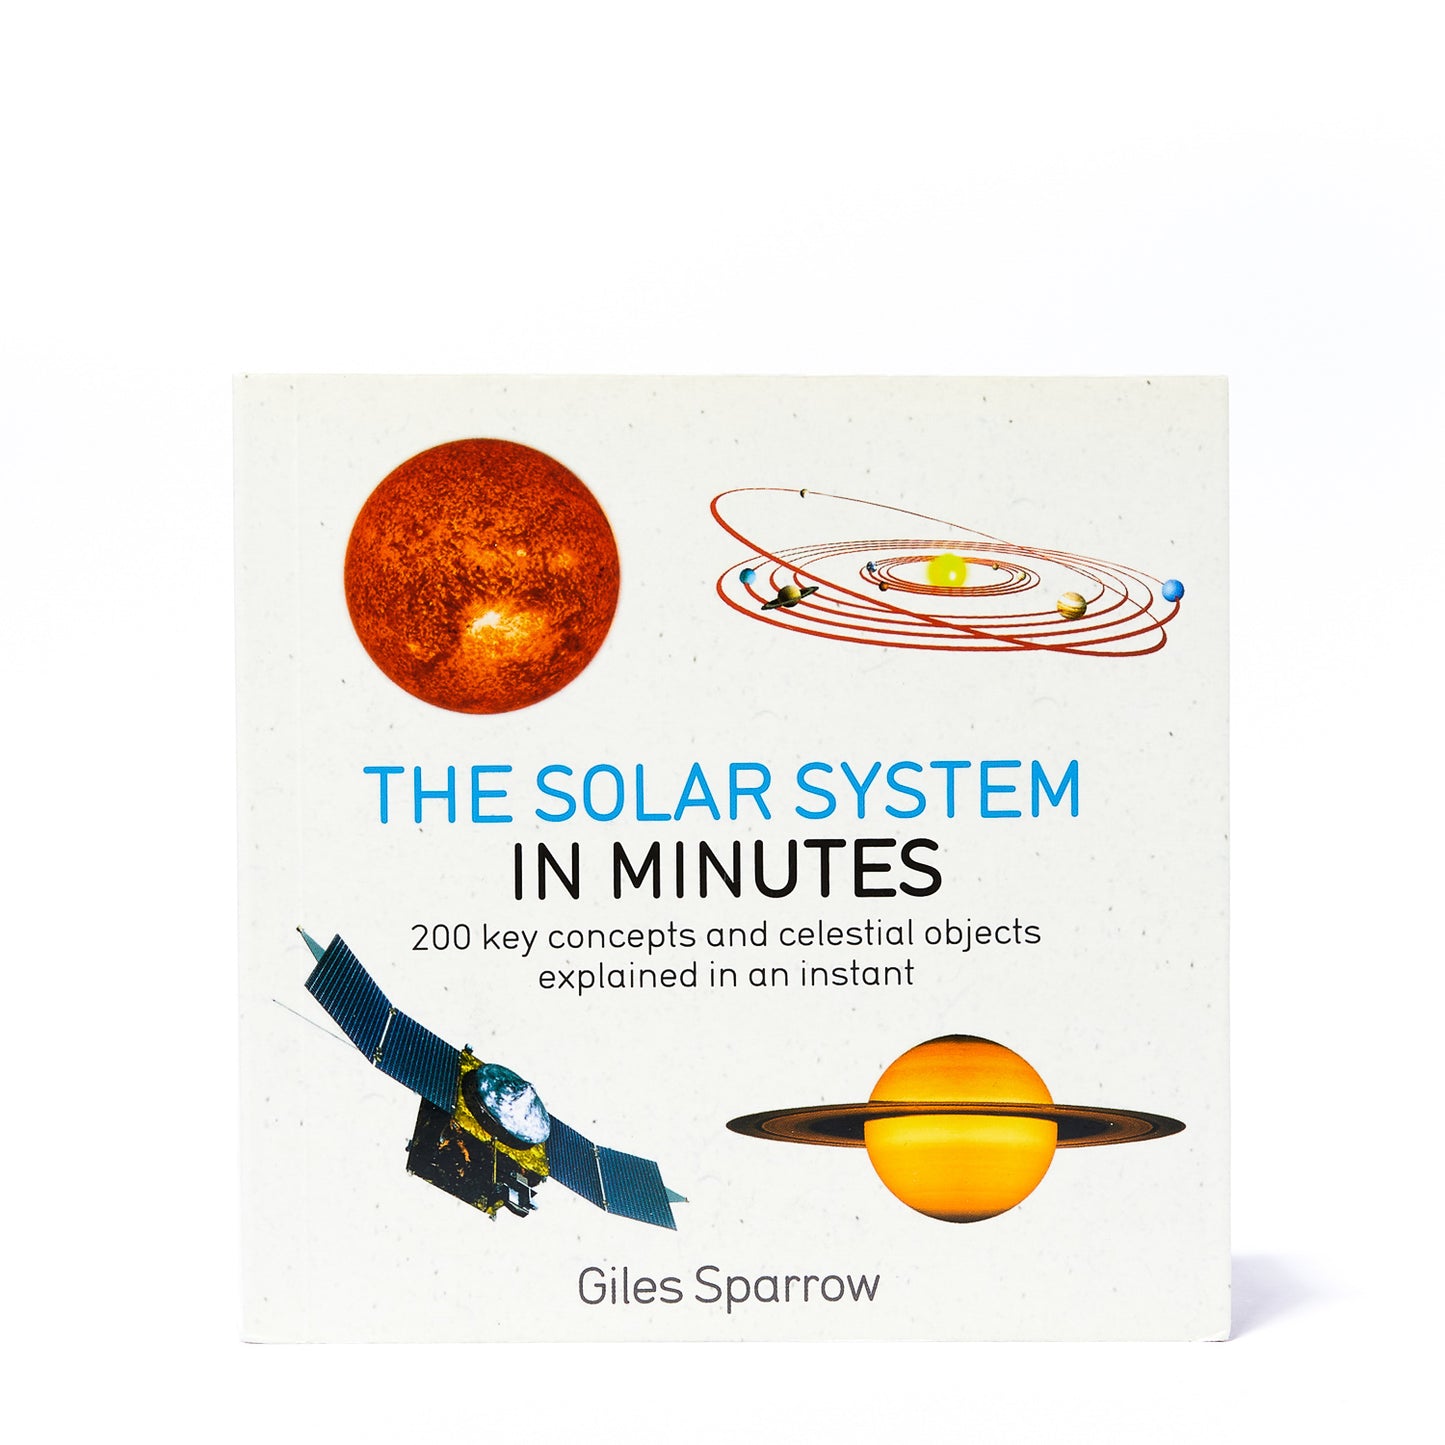 THE SOLAR SYSTEM IN MINUTES